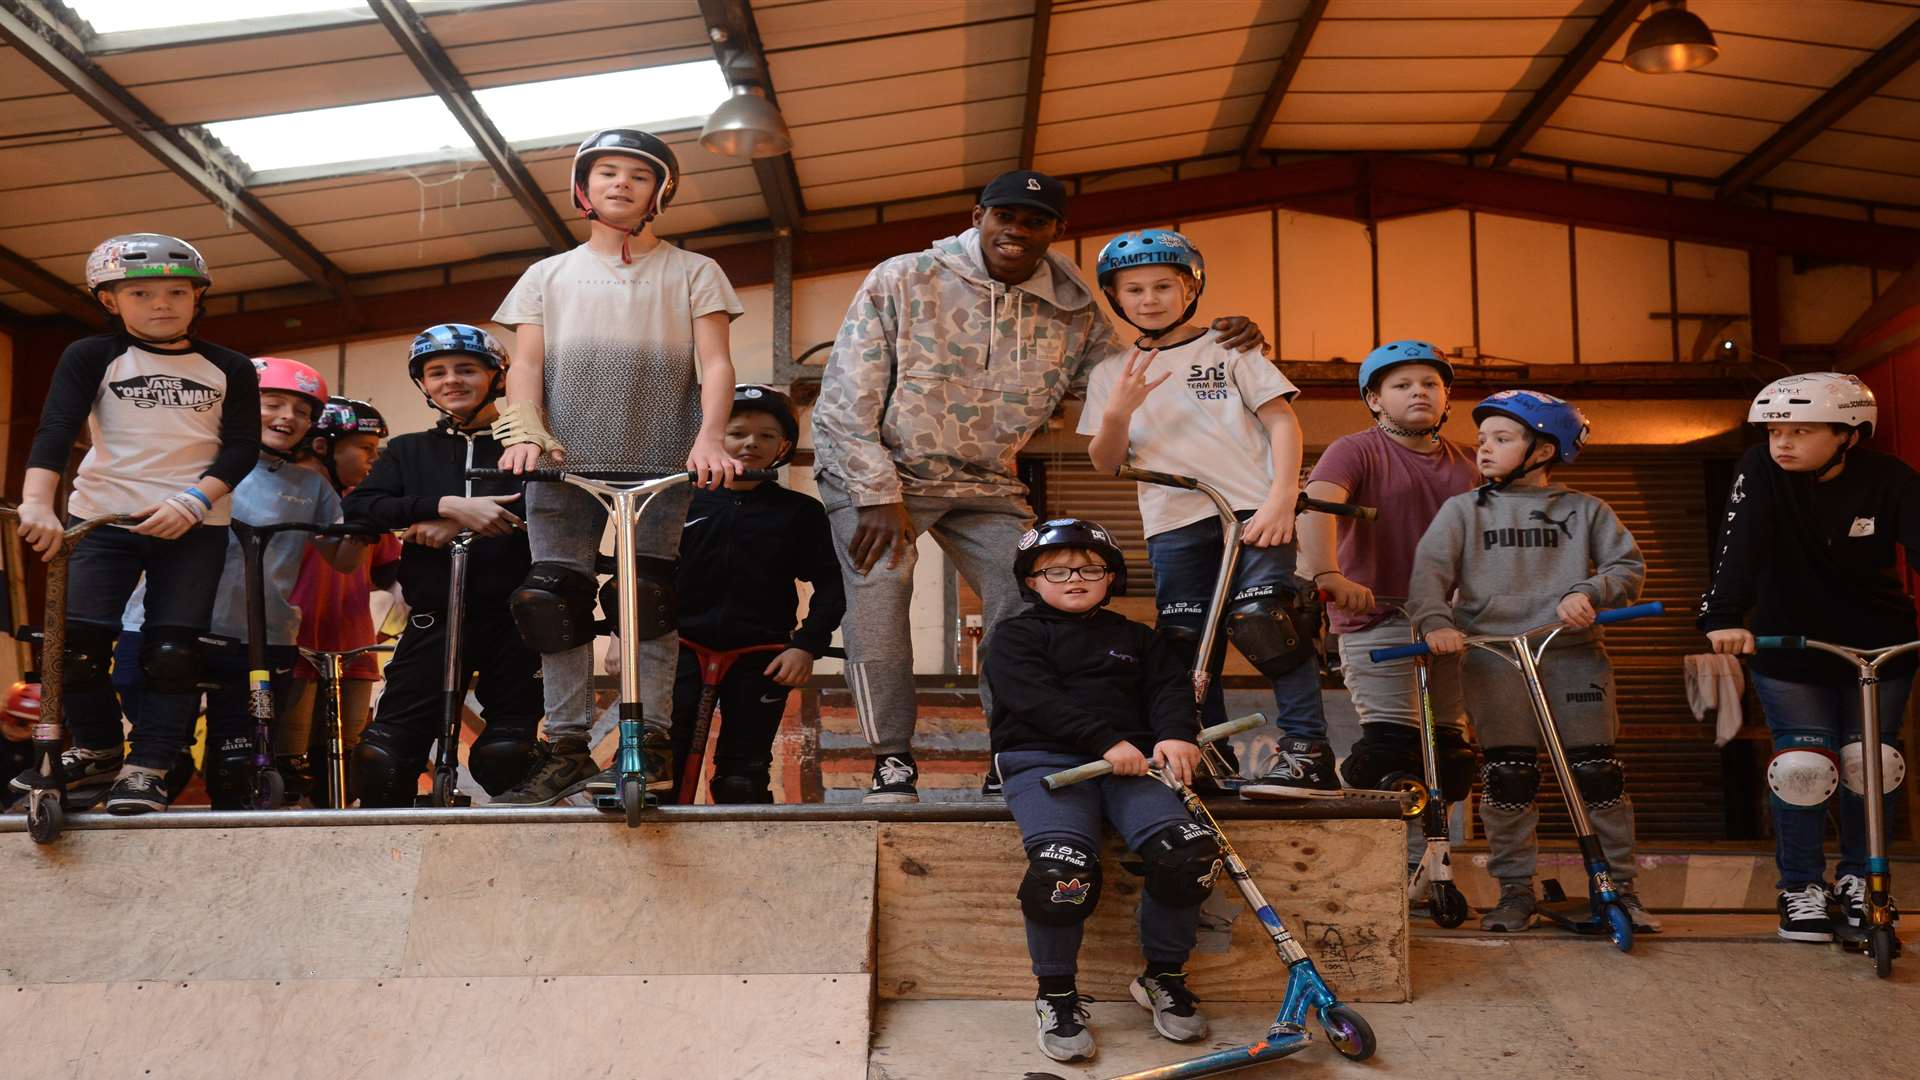 Nathanael West with some of the scooterists Unit 1b, Rochester Airport Industrial Estate Indoor Skate park